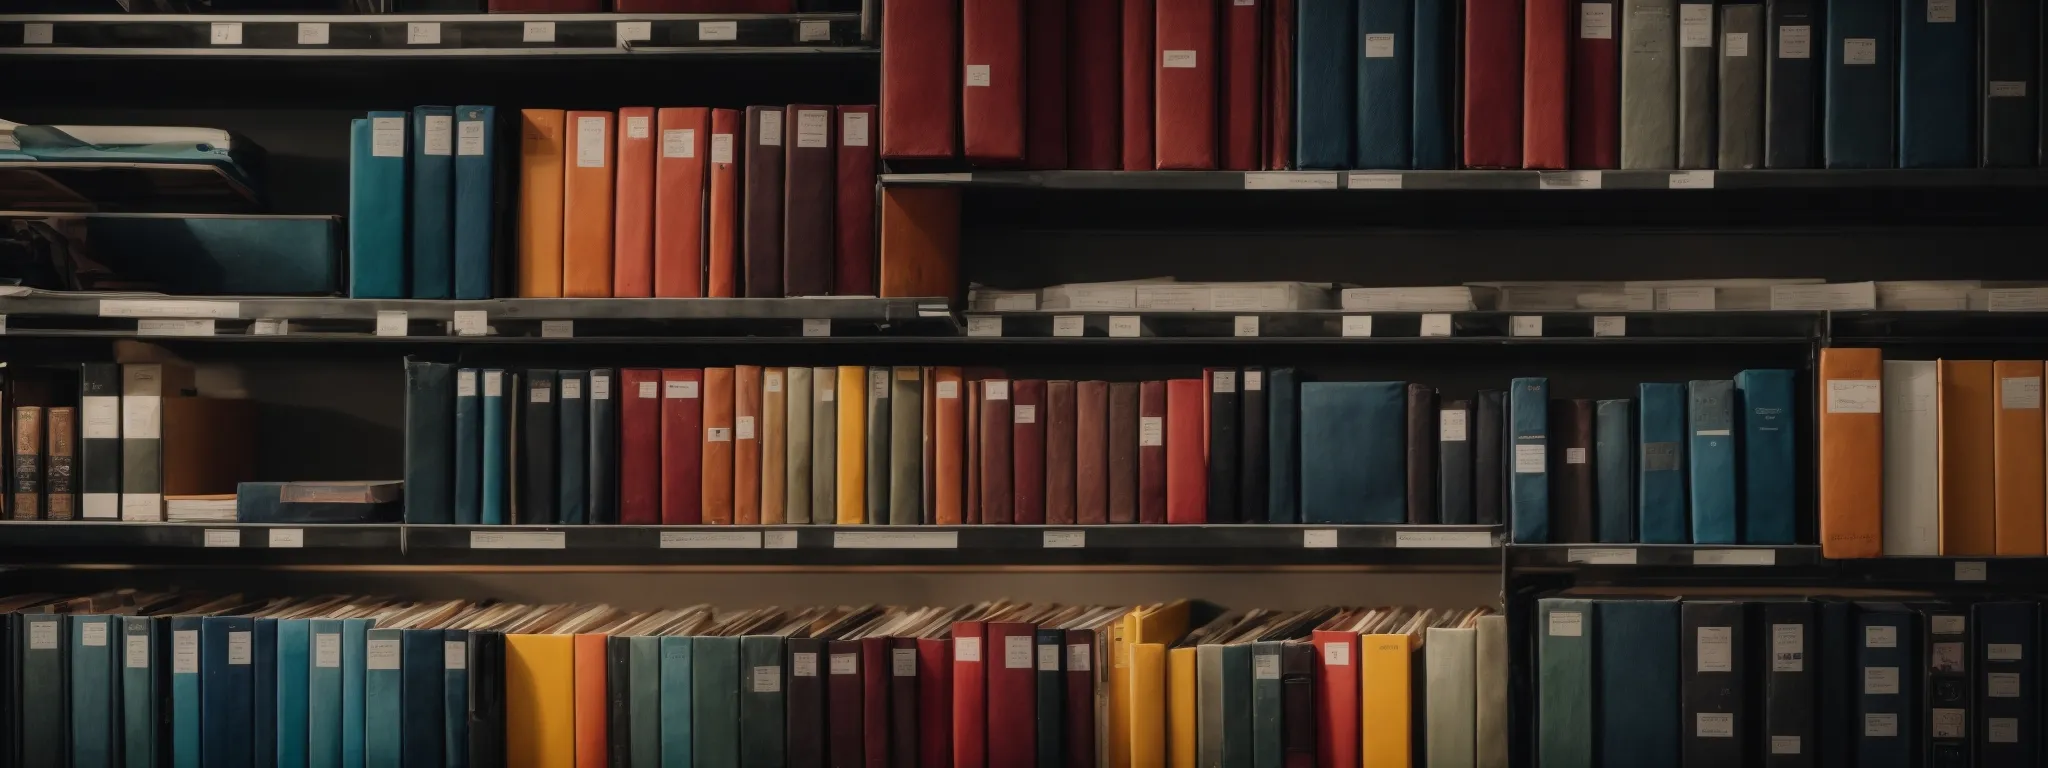 rows of organized, color-coded folders neatly arrayed on a shelf, symbolizing structured categorization.